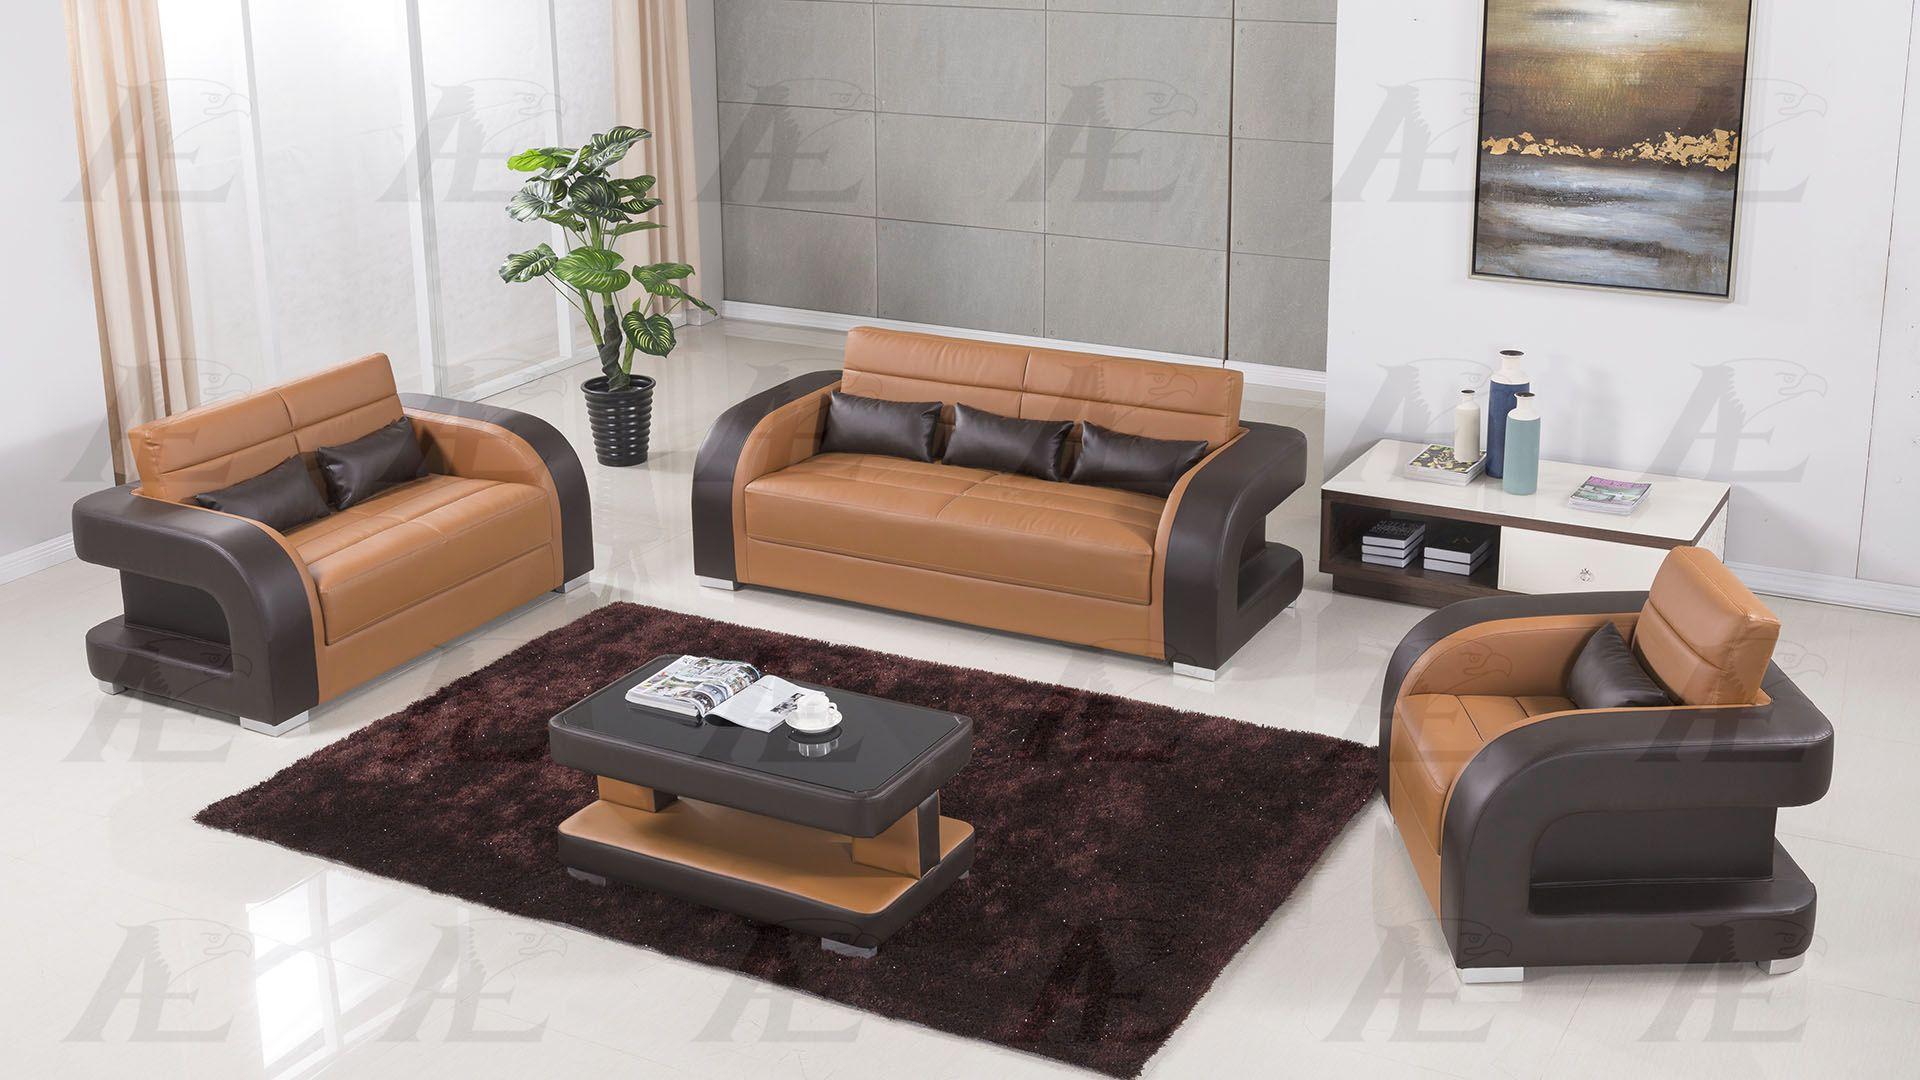 

    
Camel Dark Brown Faux Leather Sofa Set w/Coffee Table 4P AE-D816 American Eagle
